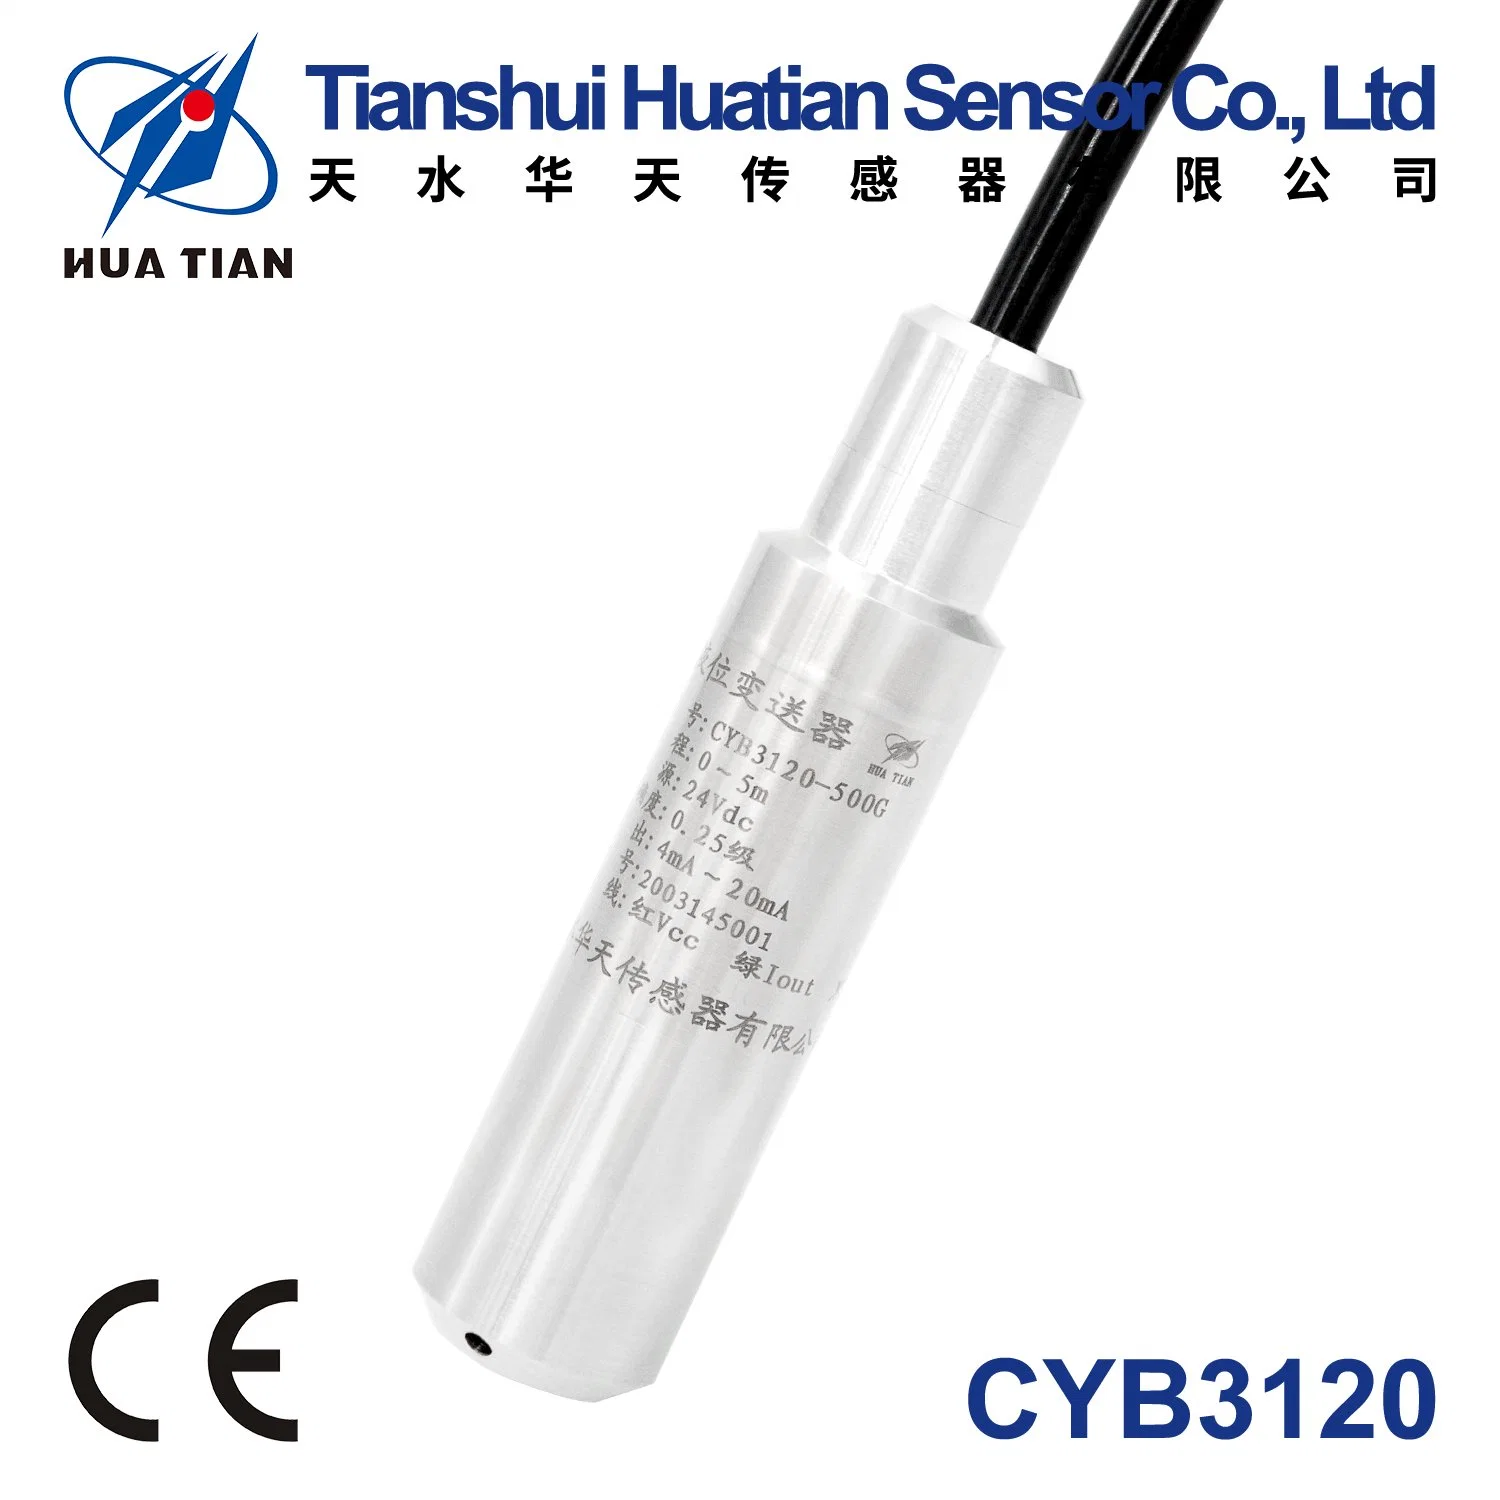 Huatian Cyb3120 Throw-in Type China Factory IP68 High Accuracy Low Cost Hydrostatic Submersible Fuel Liquid Water Level Sensor Transmitter